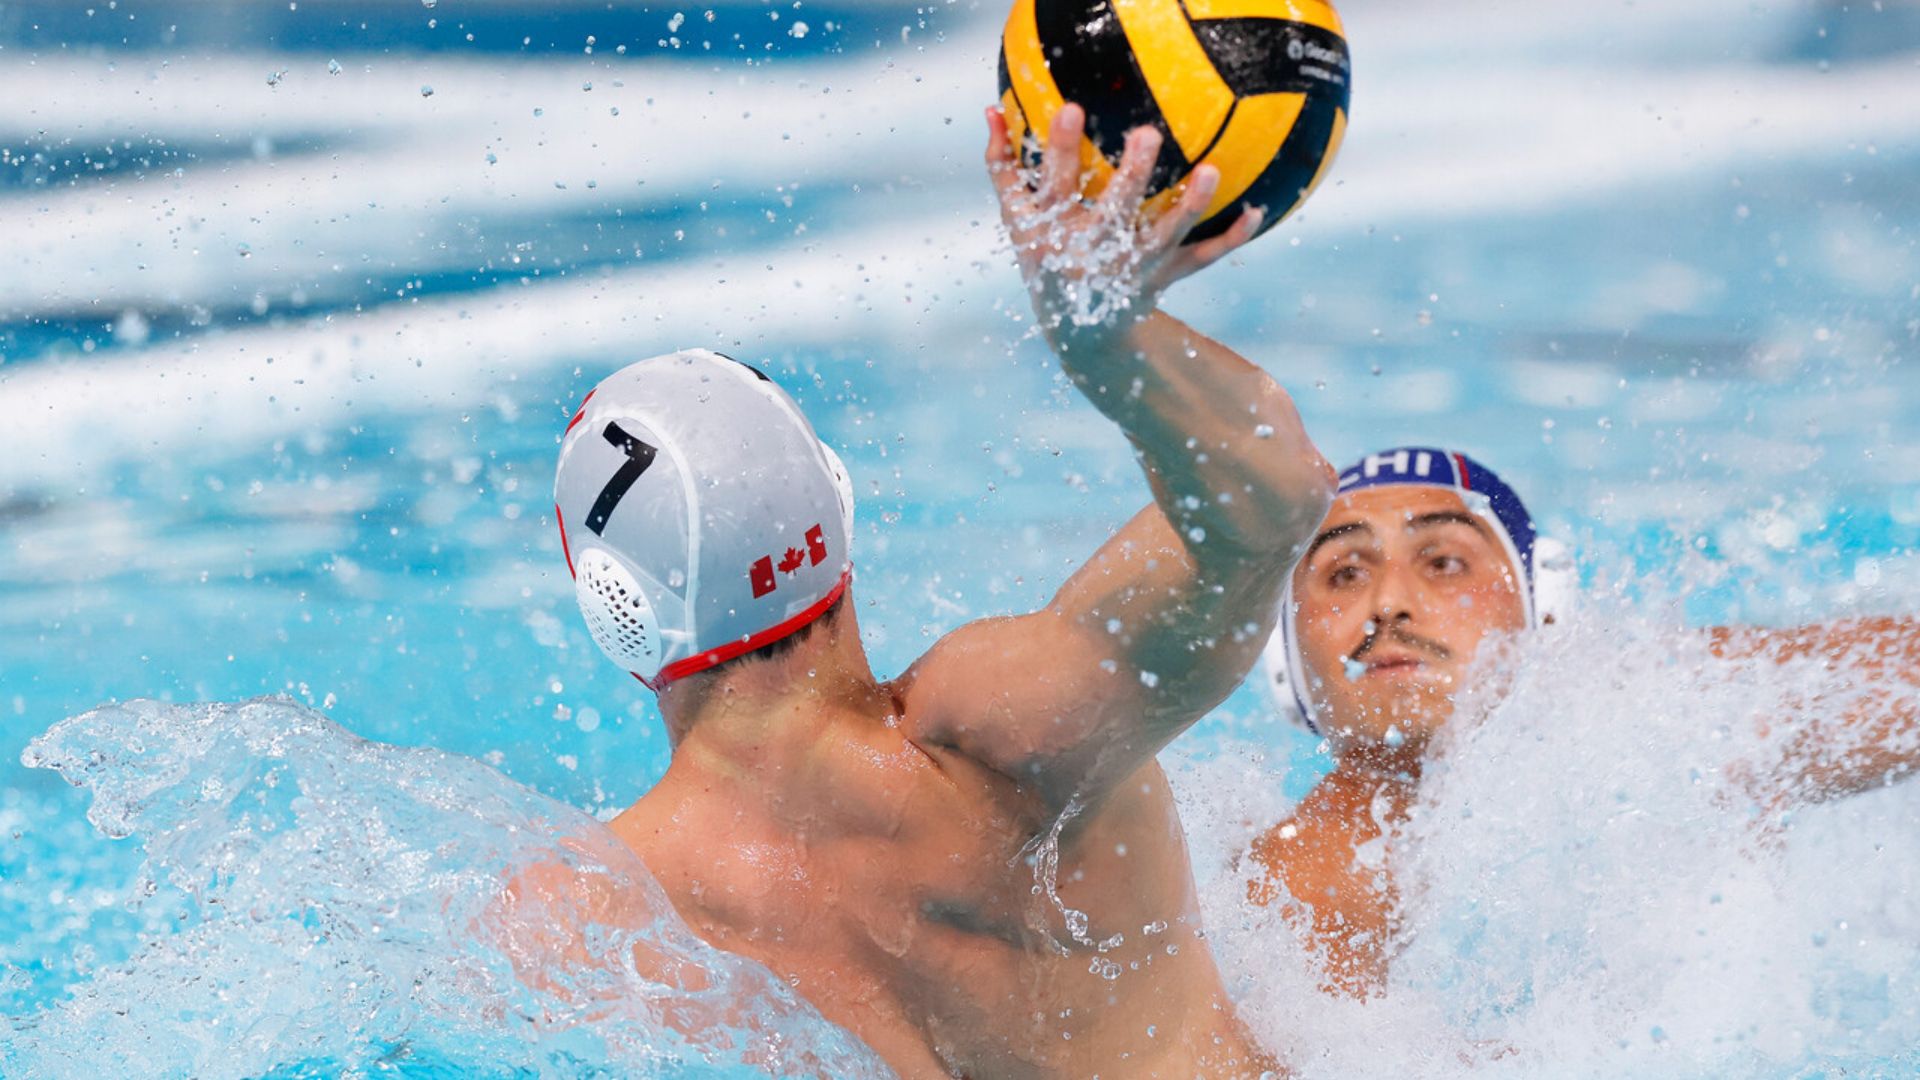 Canada easily overcomes Chile in male water polo